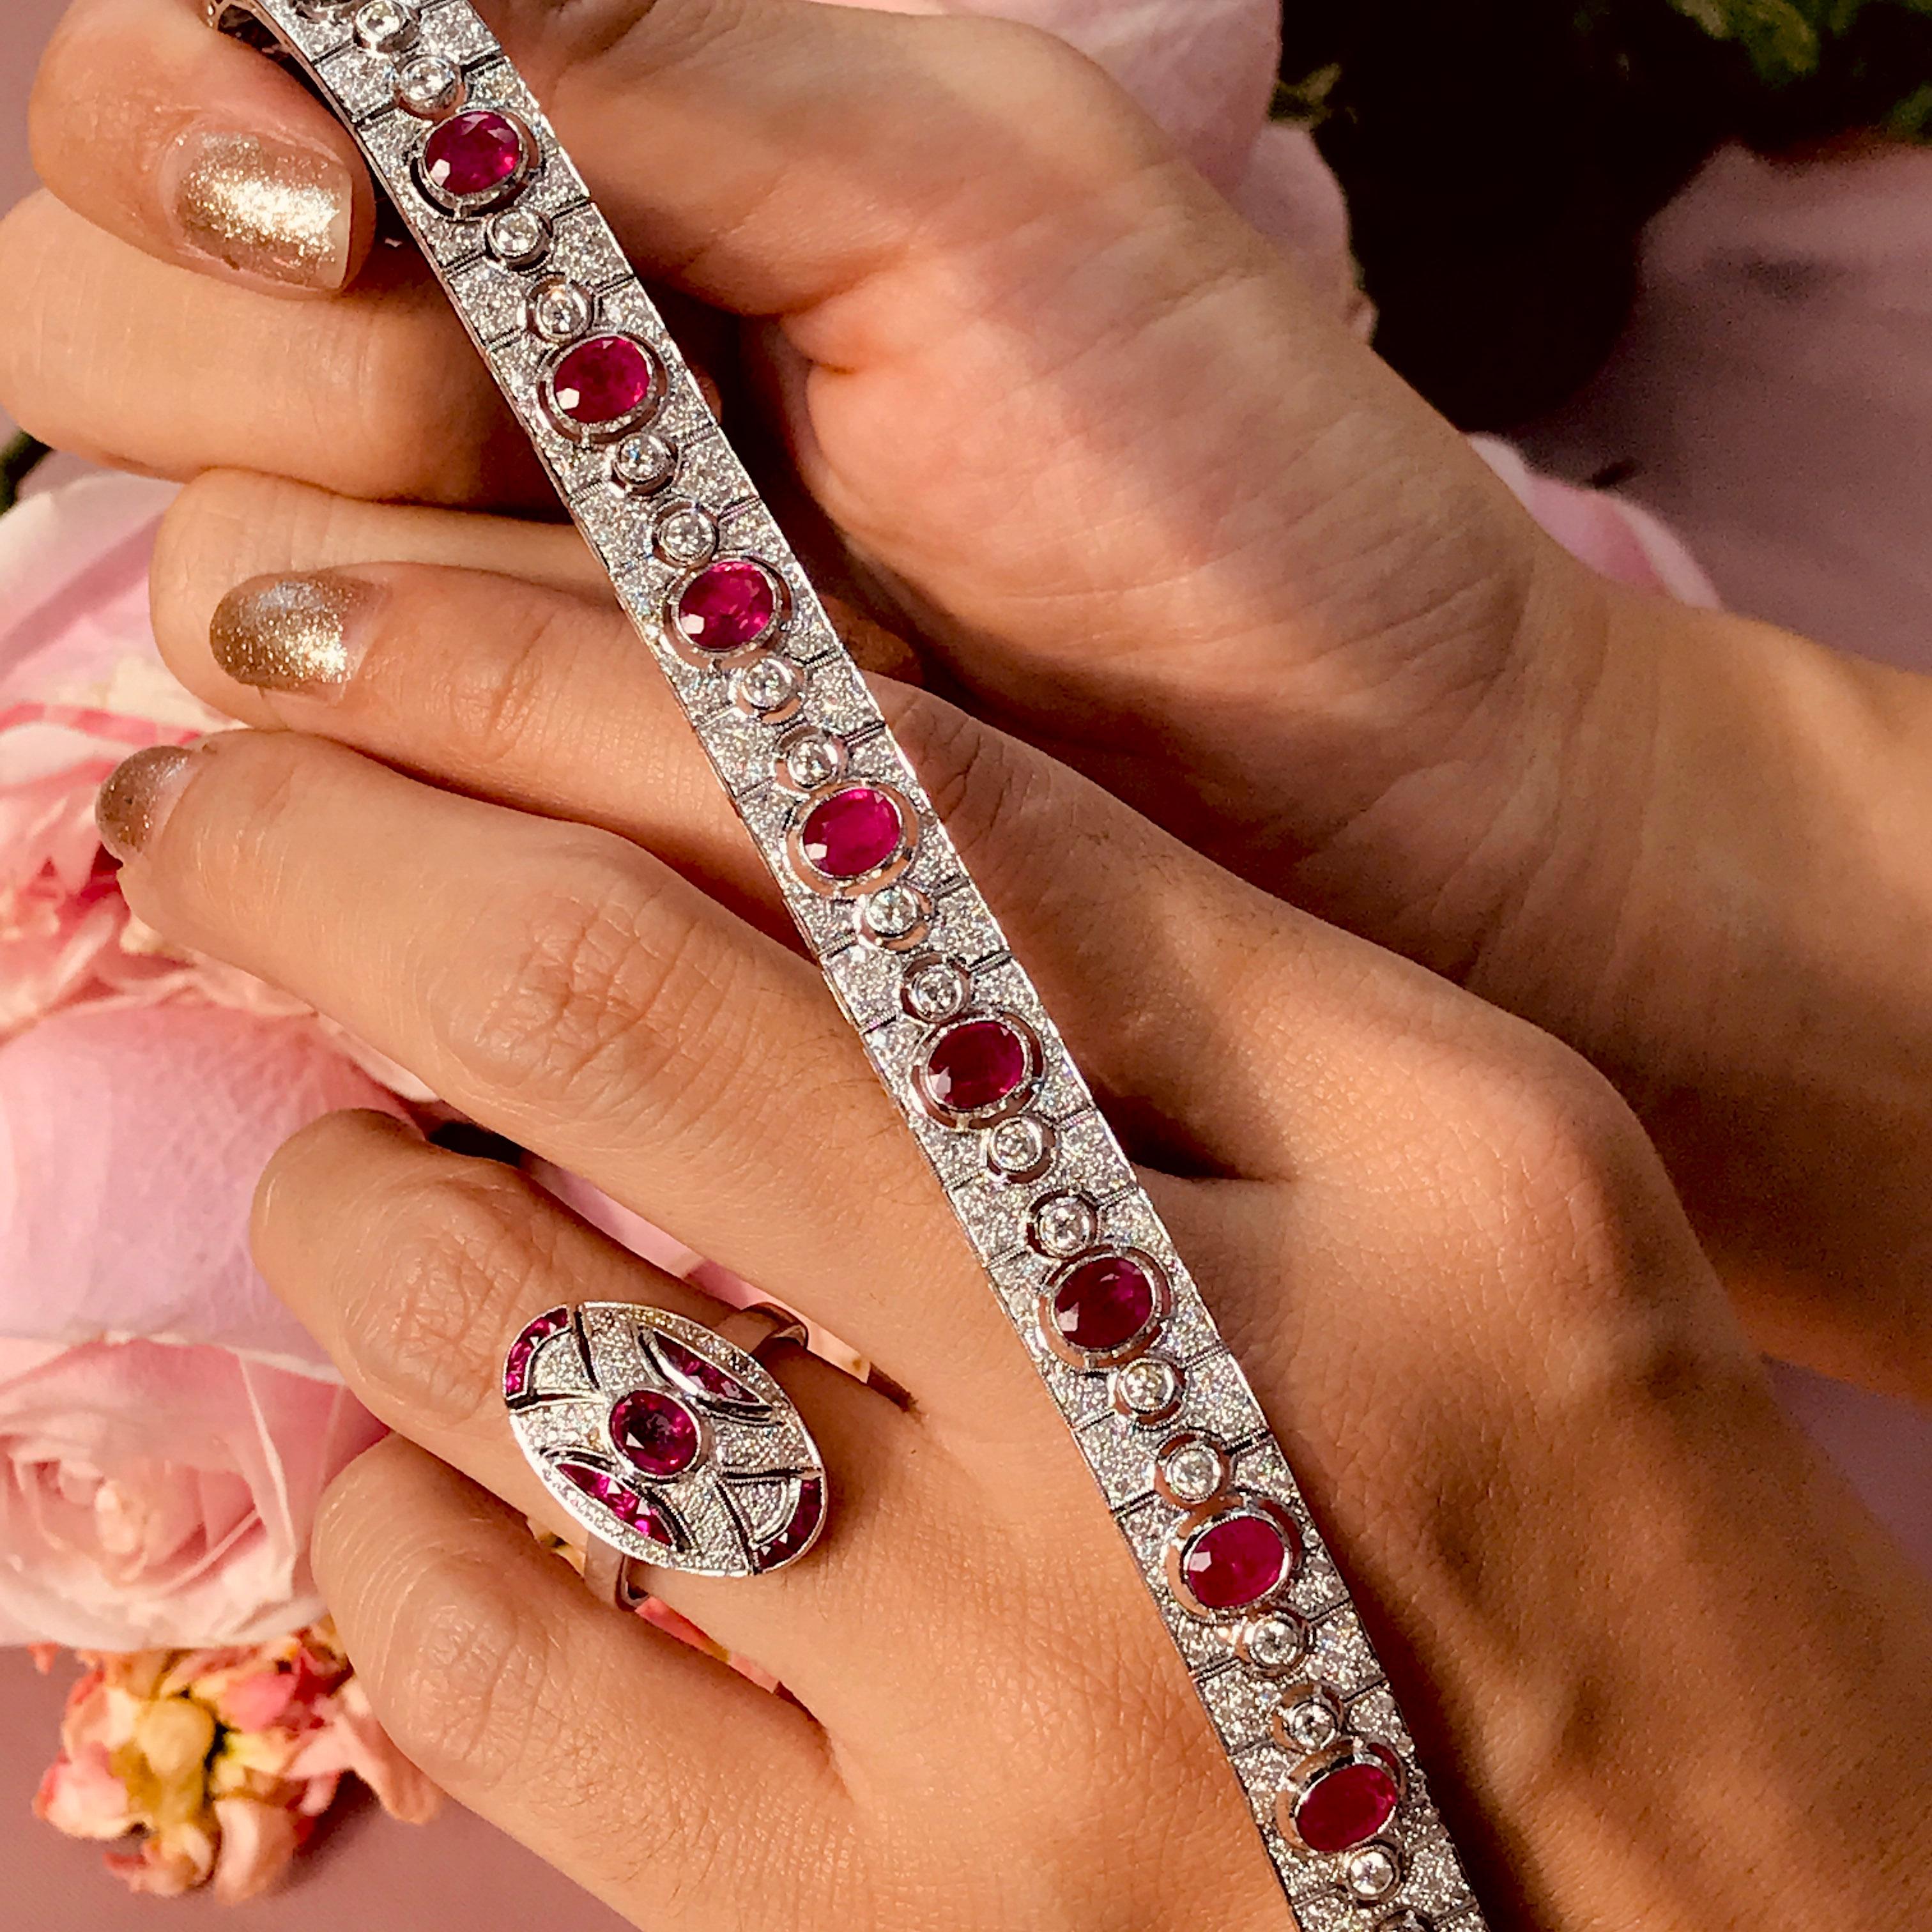 This stunning, fine and impressive antique style ruby bracelet with diamonds is crafted in 18k white gold.  The fully articulated bracelet is composed of twelve oval rubies and 384 round brilliant diamonds. This wonderful piece is a must-have for